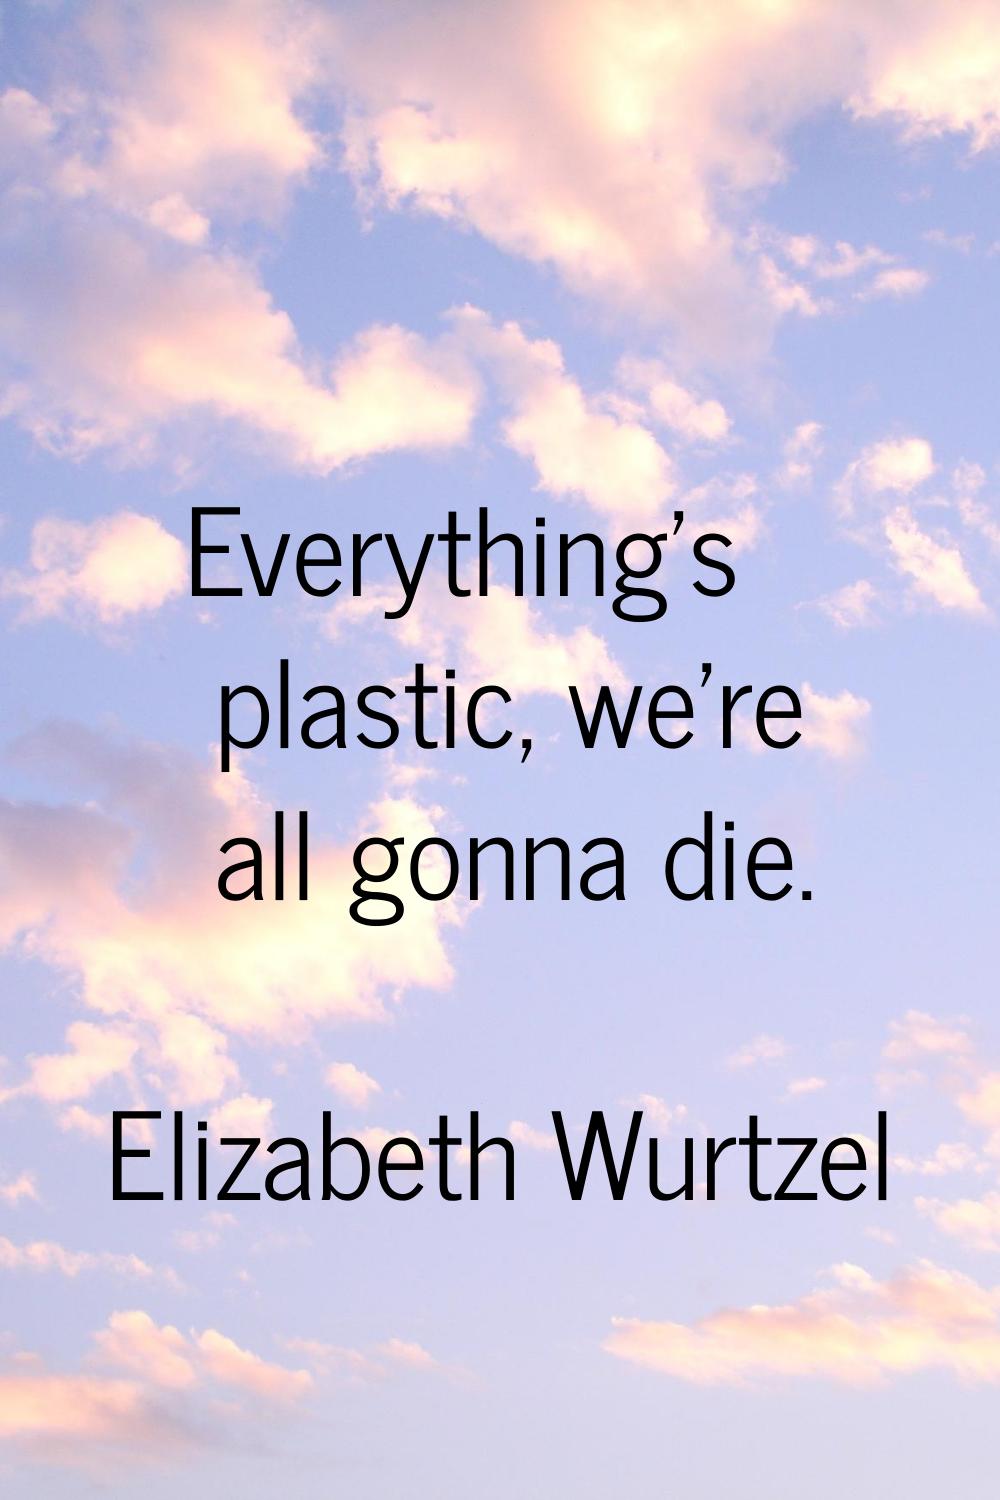 Everything's plastic, we're all gonna die.